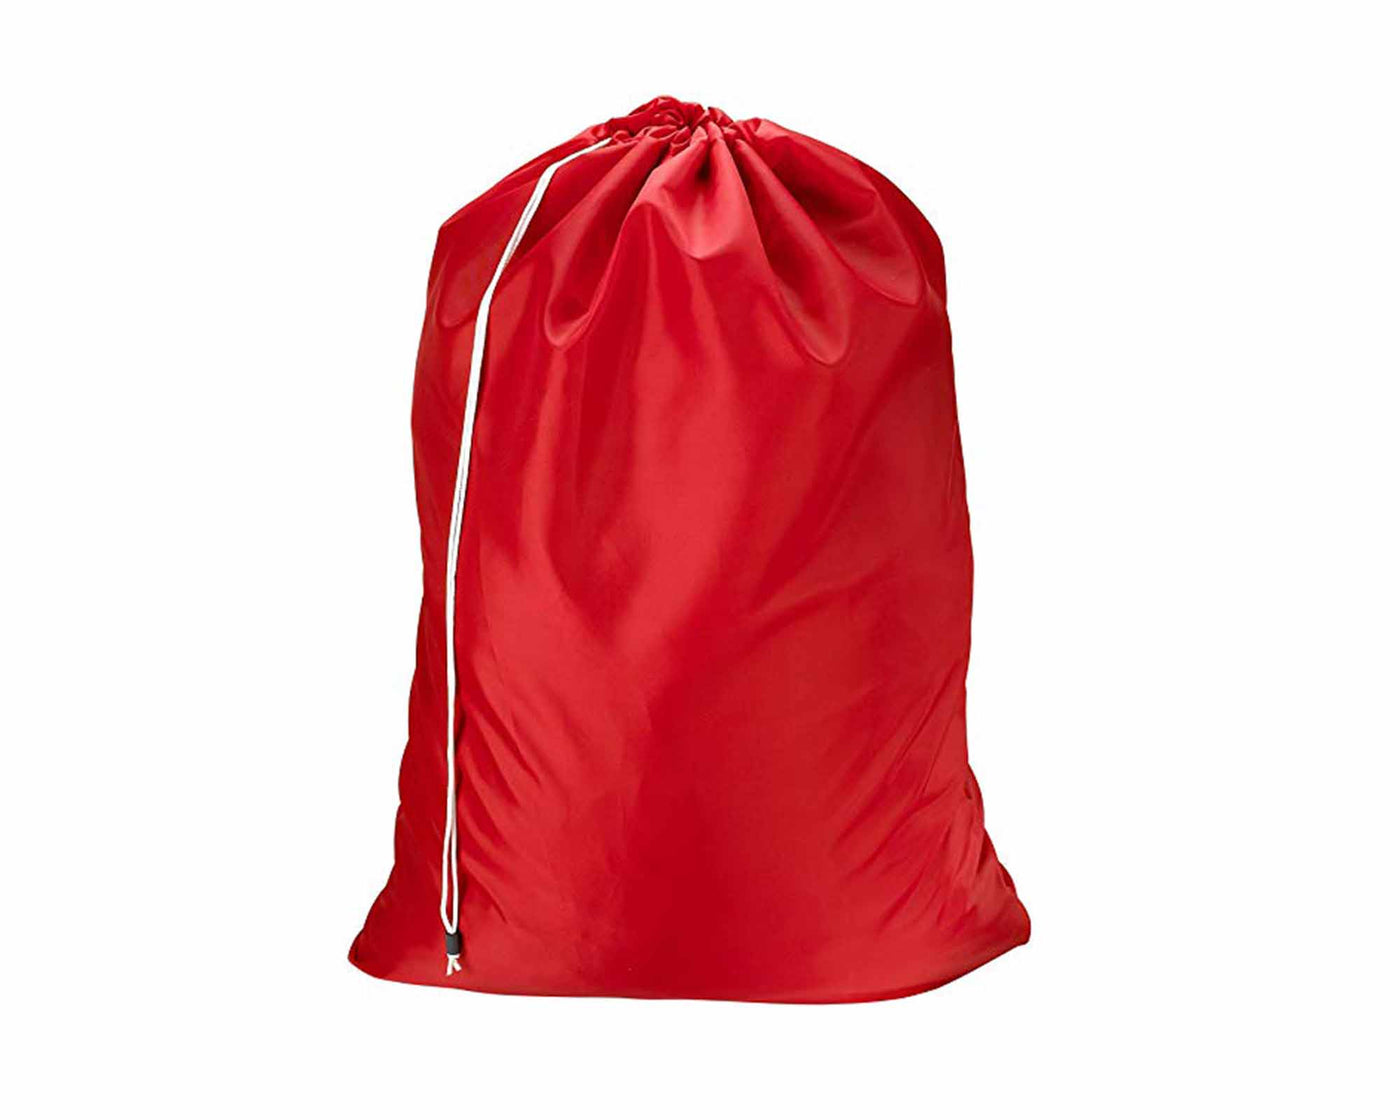 Industrial red laundry bag with white draw string